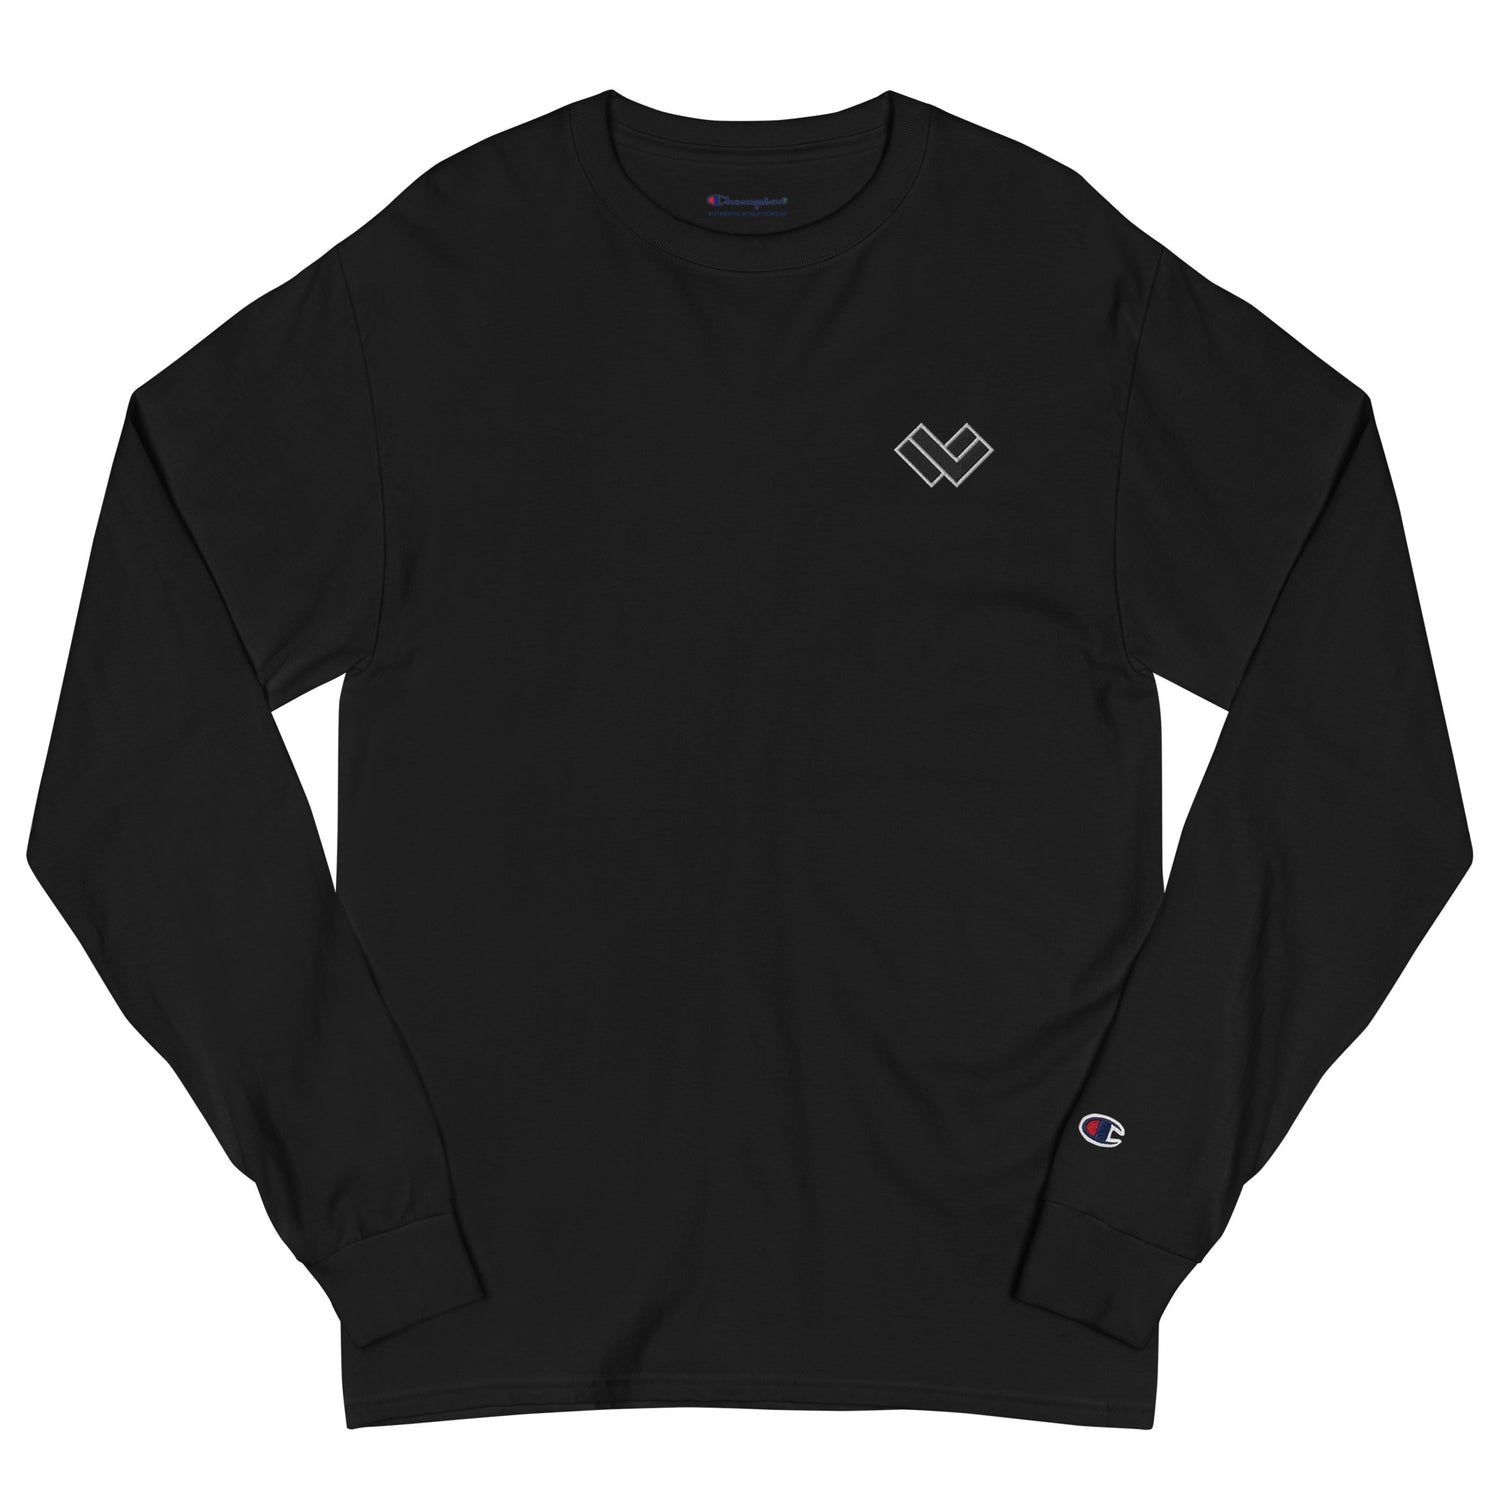 Lax World Cradle Long Sleeve B/W Lacrosse Tee By Champion - Front 